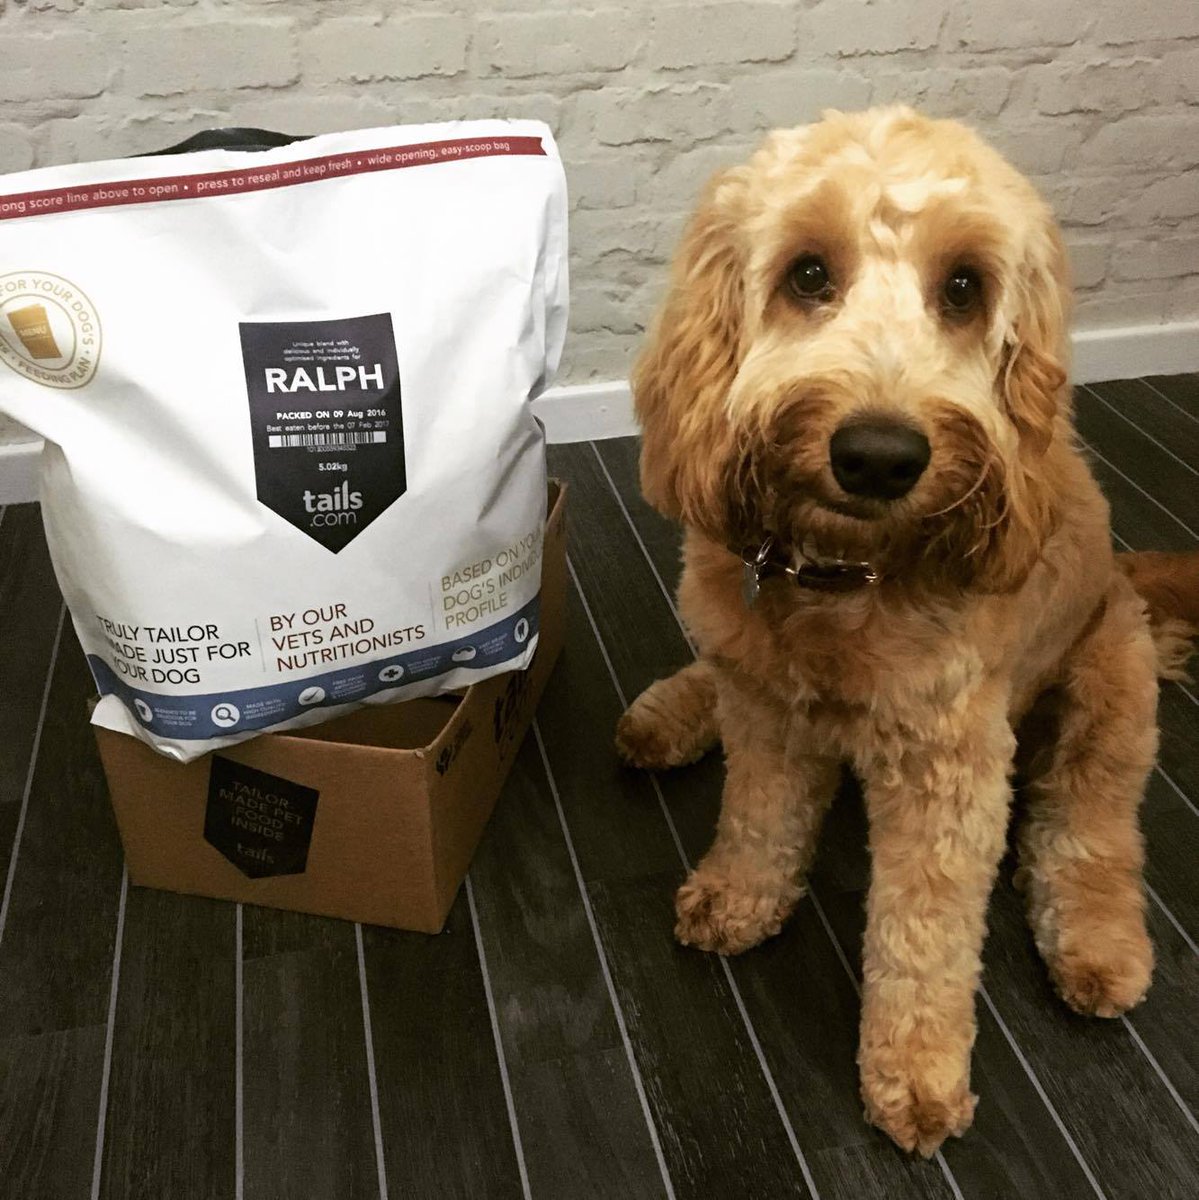 on Twitter "Tailormade dog food 🐶 Try 2 weeks